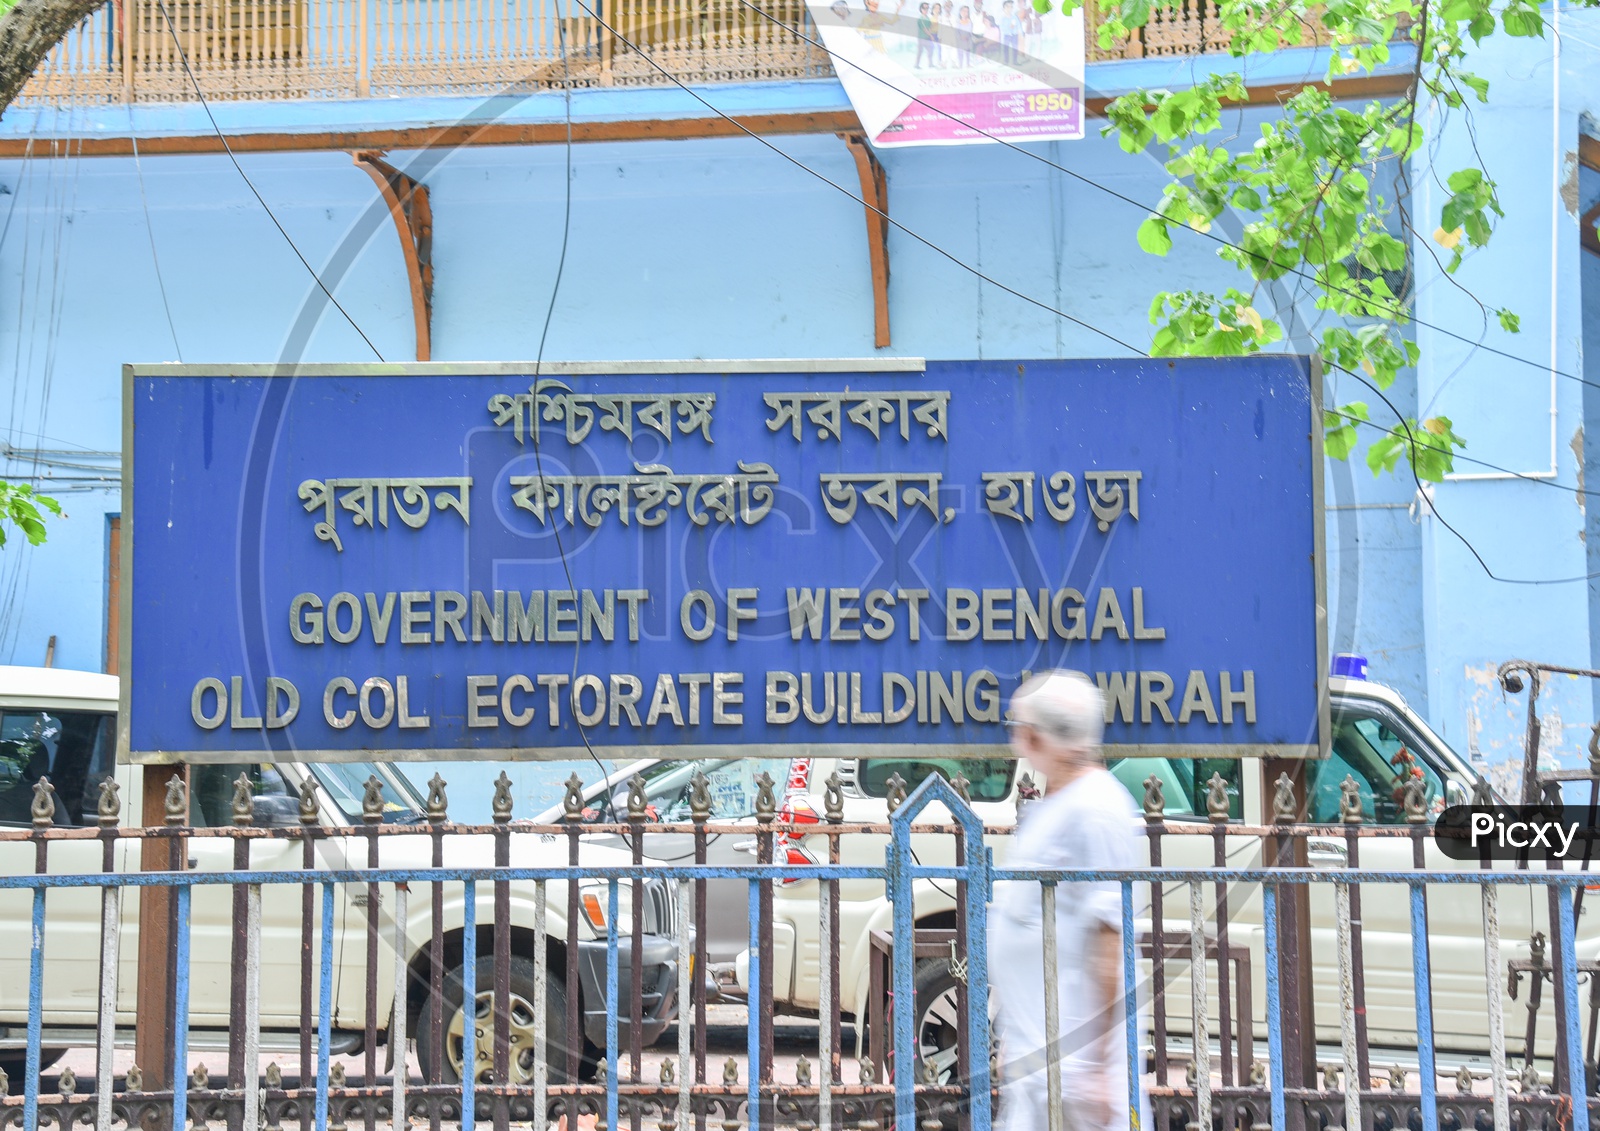 Old Collectorate Building of Government of West Bengal , Howrah